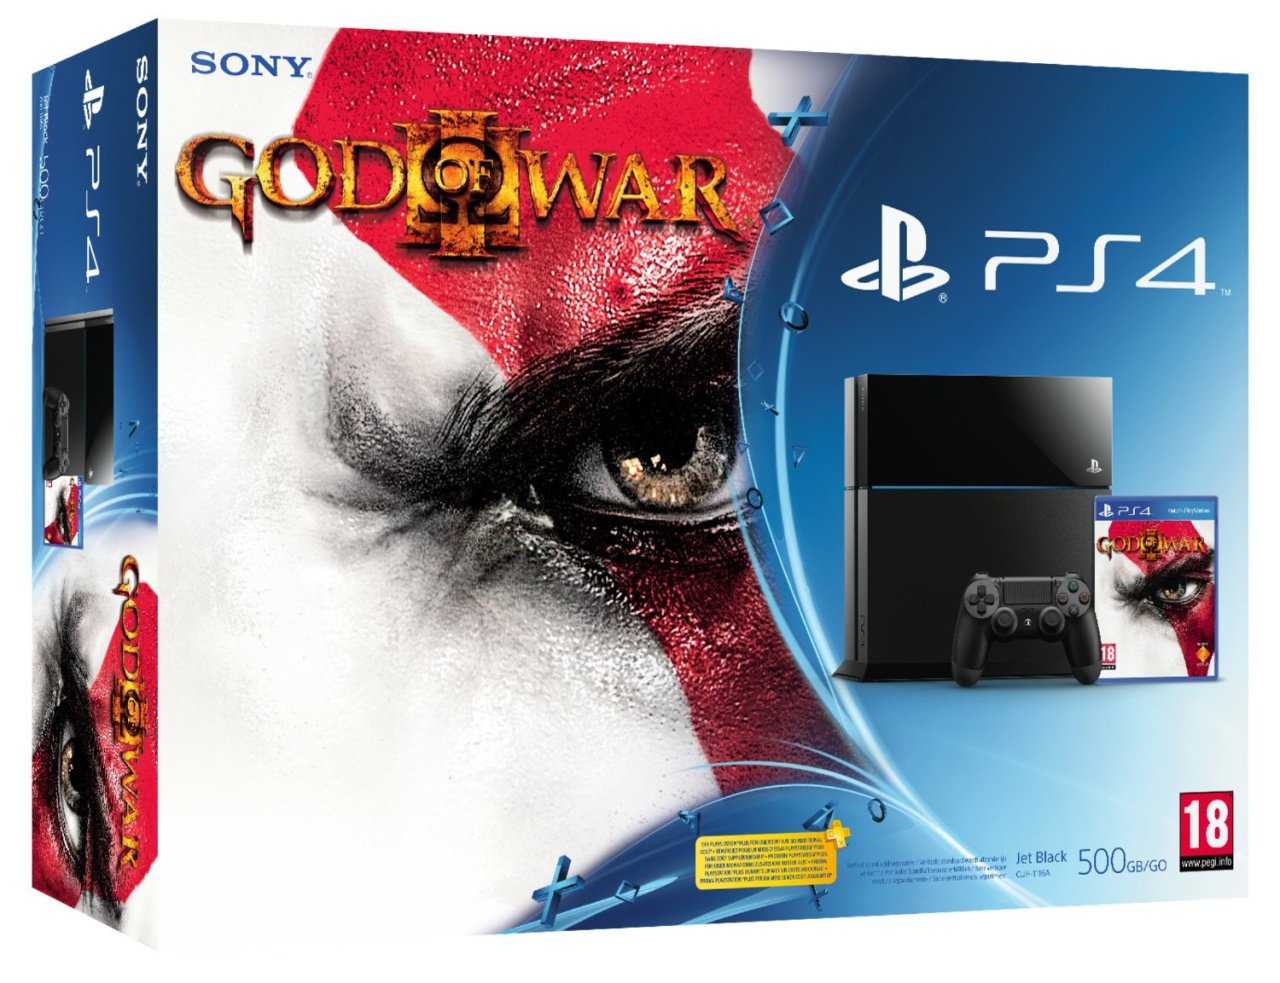 Gods Will Look Favourably Upon God of War III PS4 Bundle | Push Square